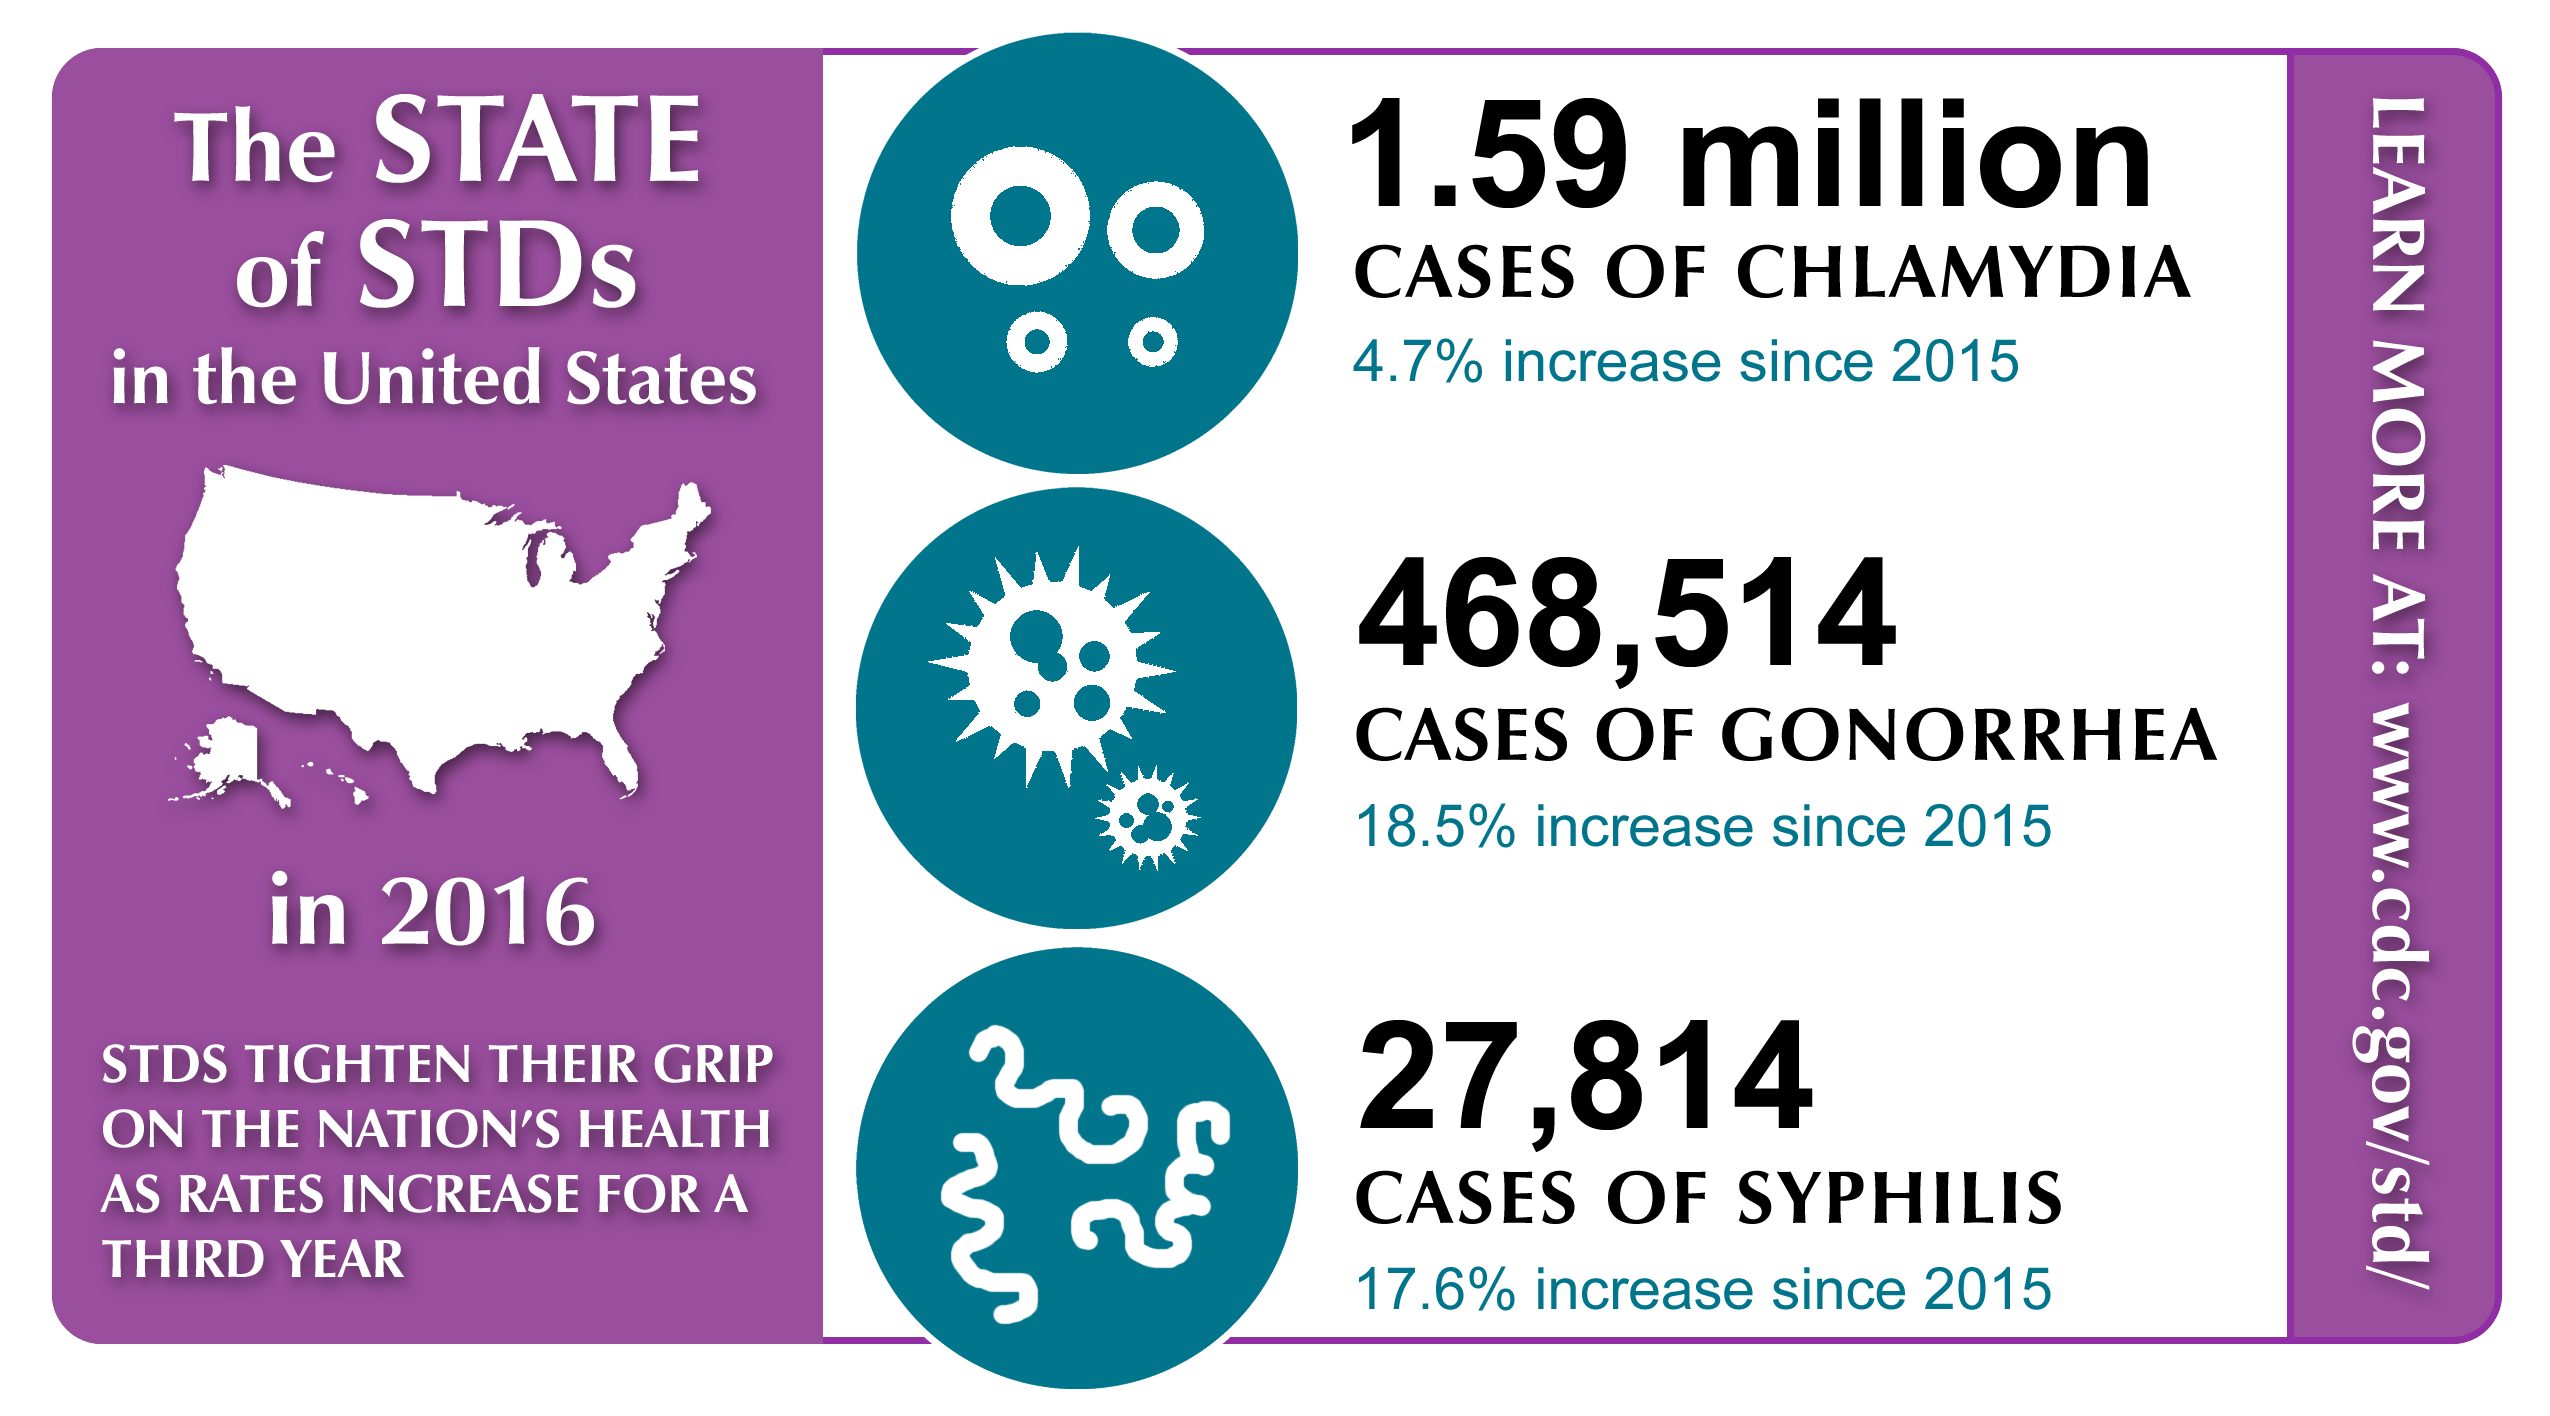 The state of STDs in the United States in 2016. STDs tighten their grip on the nation's health as rates increase for a third year.